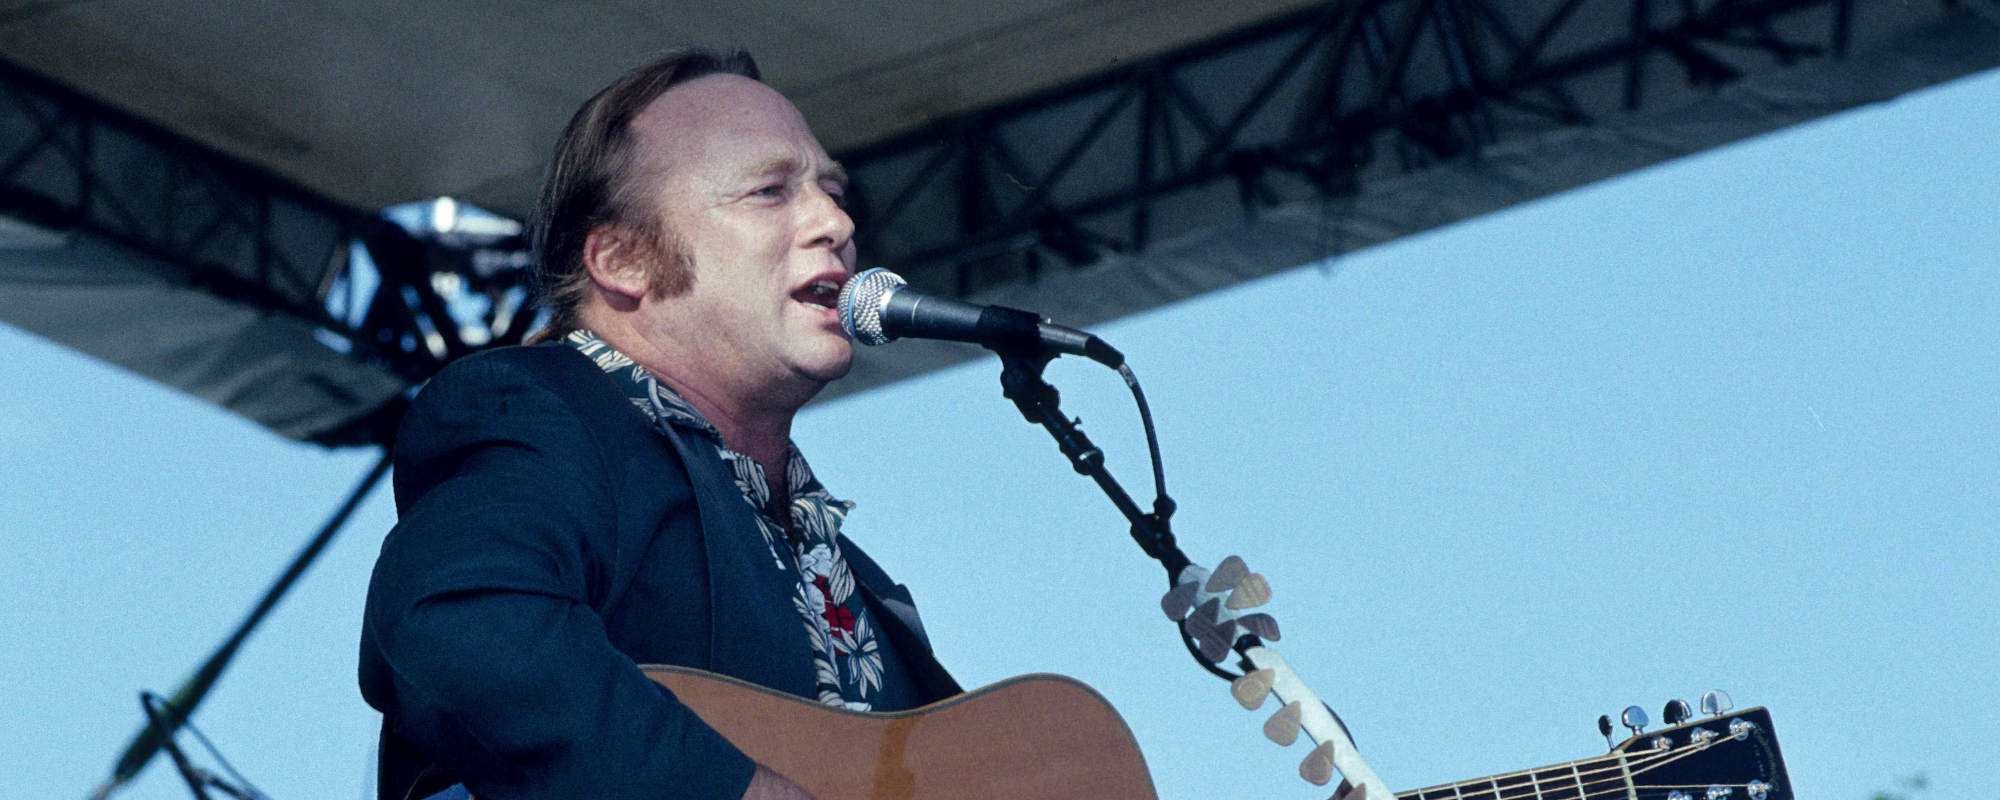 Stephen Stills Shares Live Recording of “The Lee Shore” Featuring David Crosby